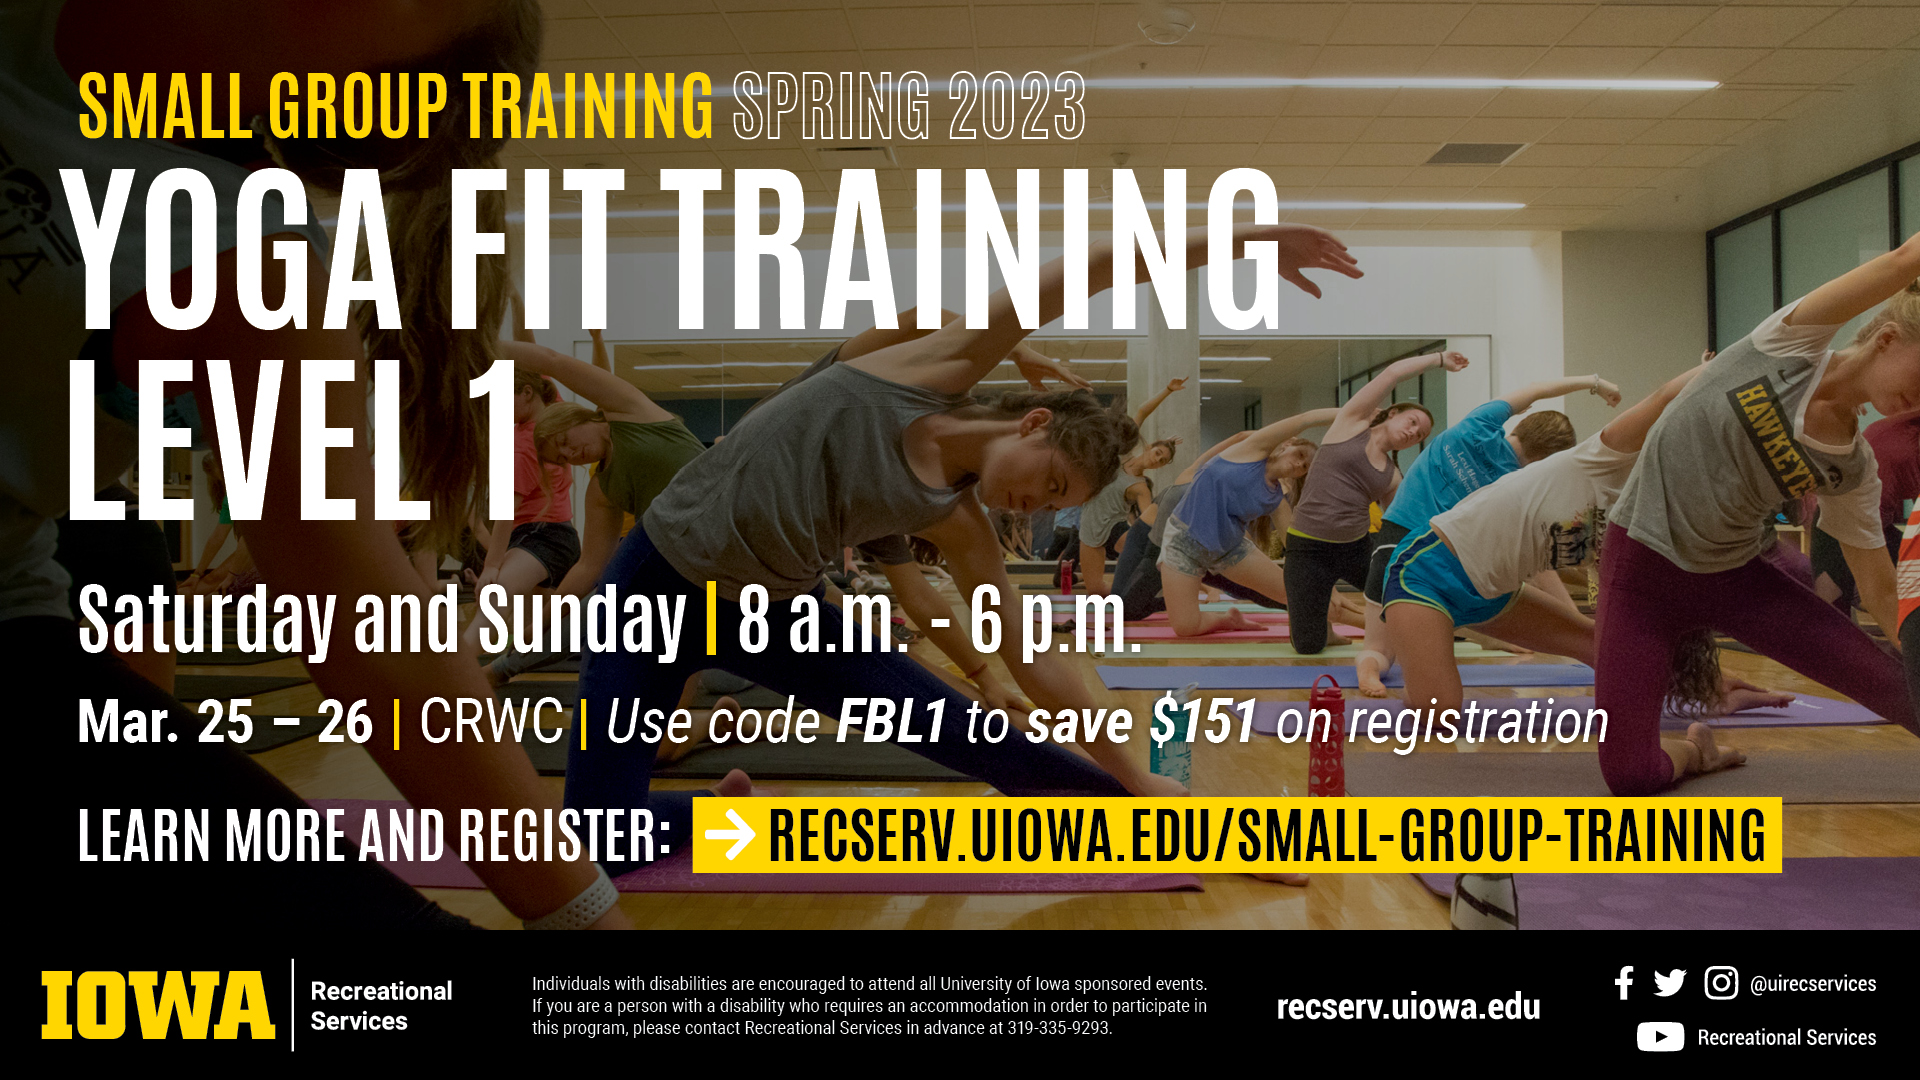 Yoga Fit Training Level 1 Saturday and Sunday 8am-6pm March 25-March 26. Use code FBL1 to save $151 on registration. Learn more and register at recserv.uiowa.edu/small-group-training